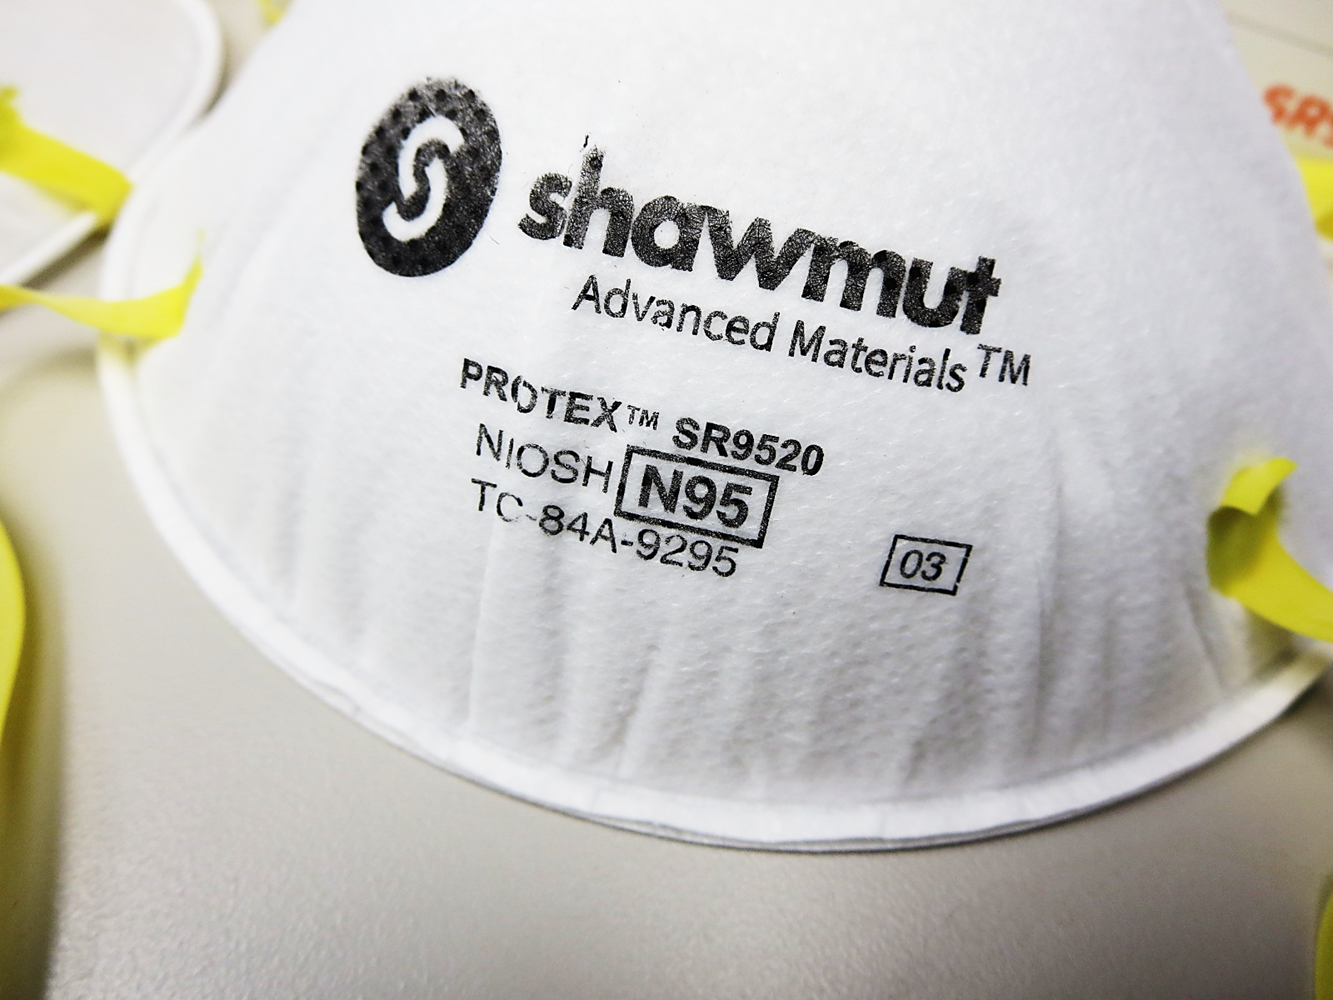 Model SR9520 Shawmut Protex Disposable N95 Molded-Cup Respirator Mask NIOSH approval stamp